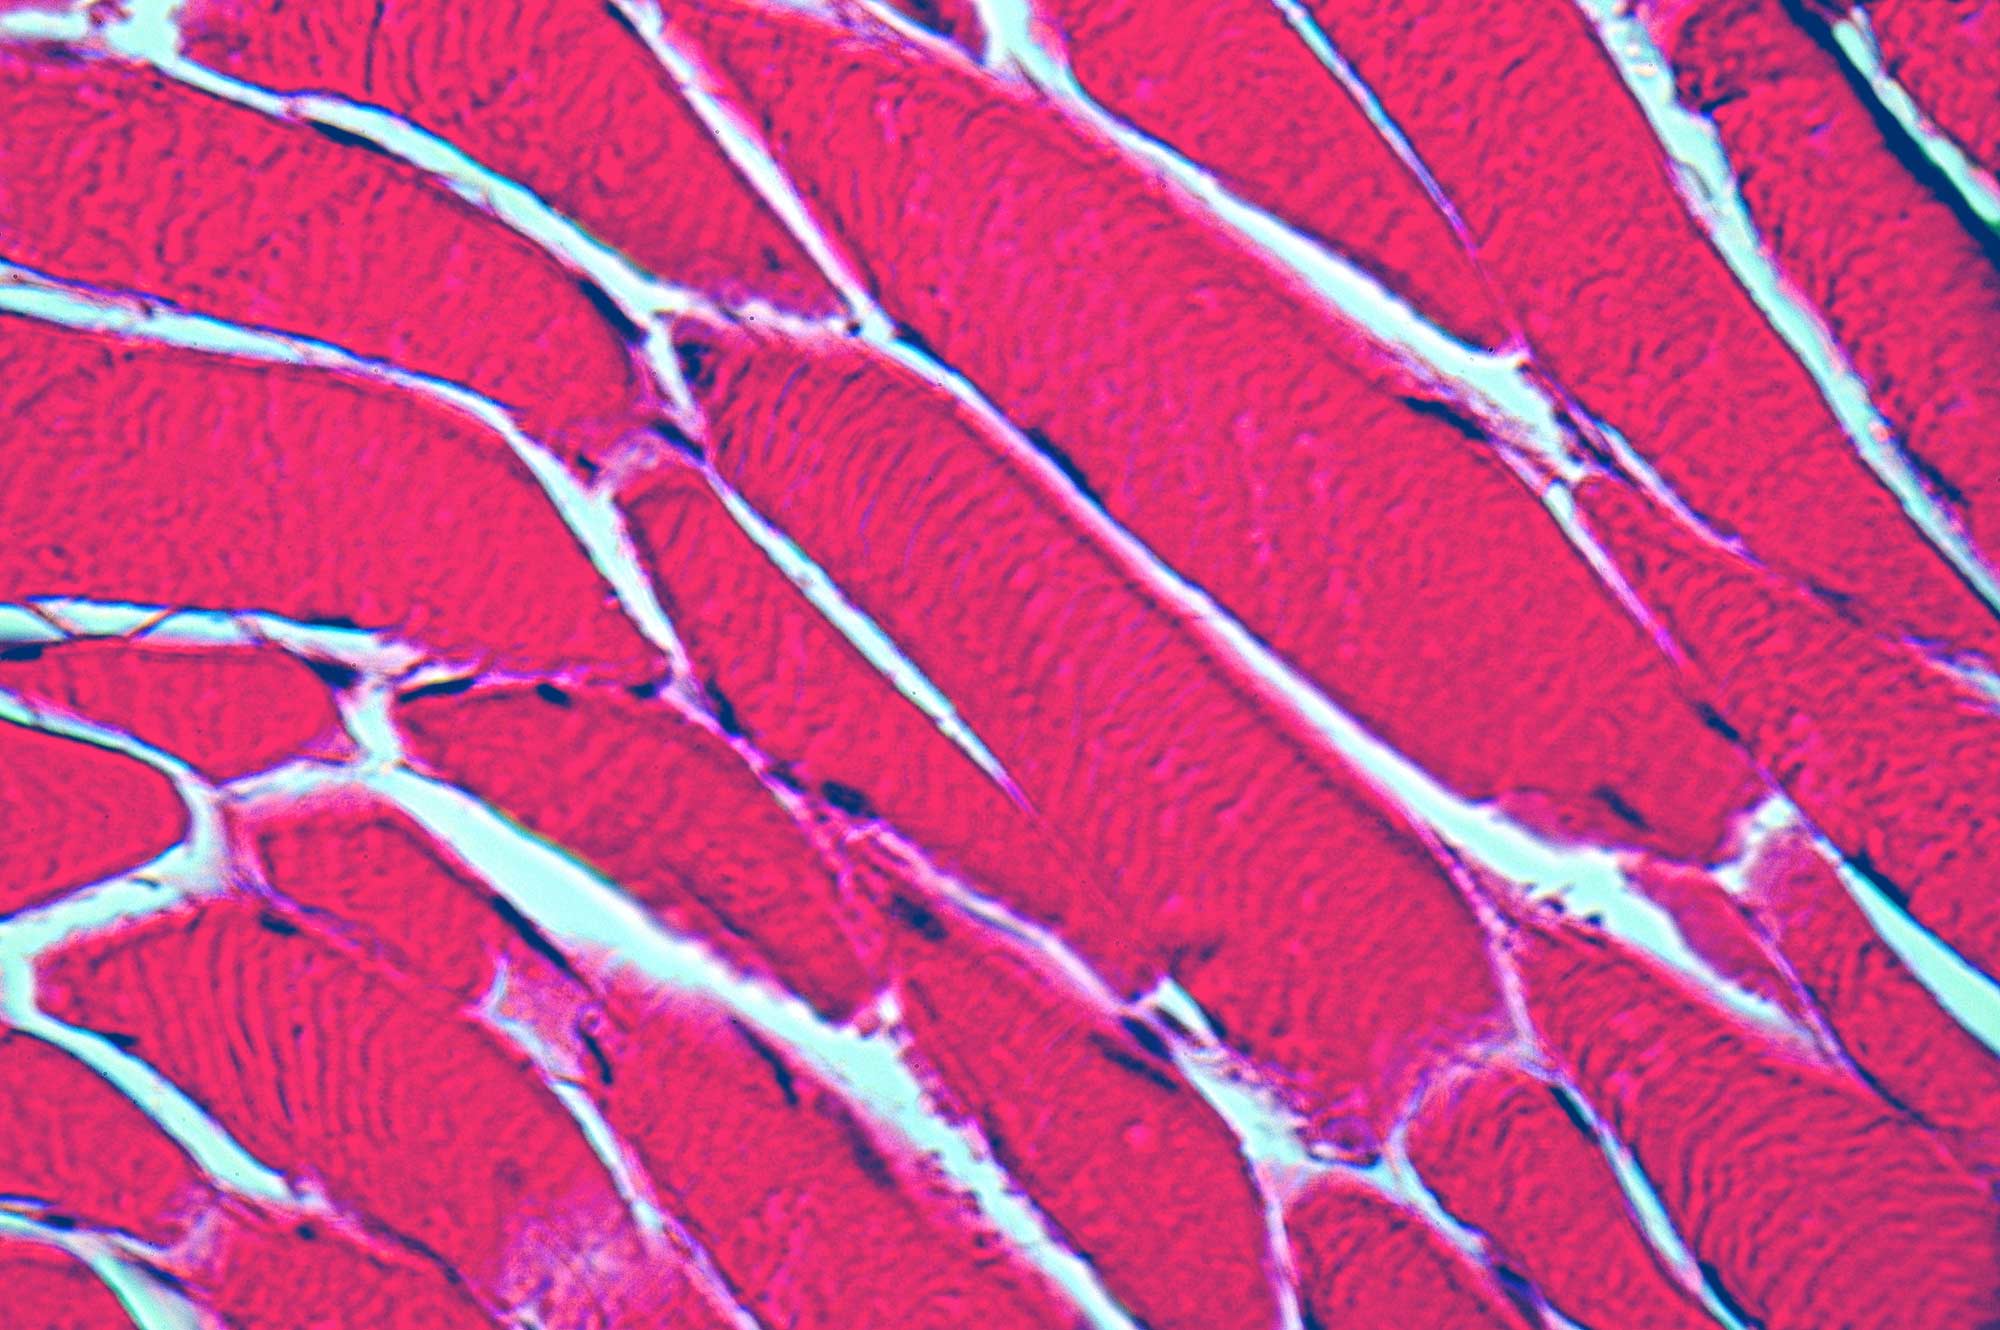 Illustration of muscle tissue